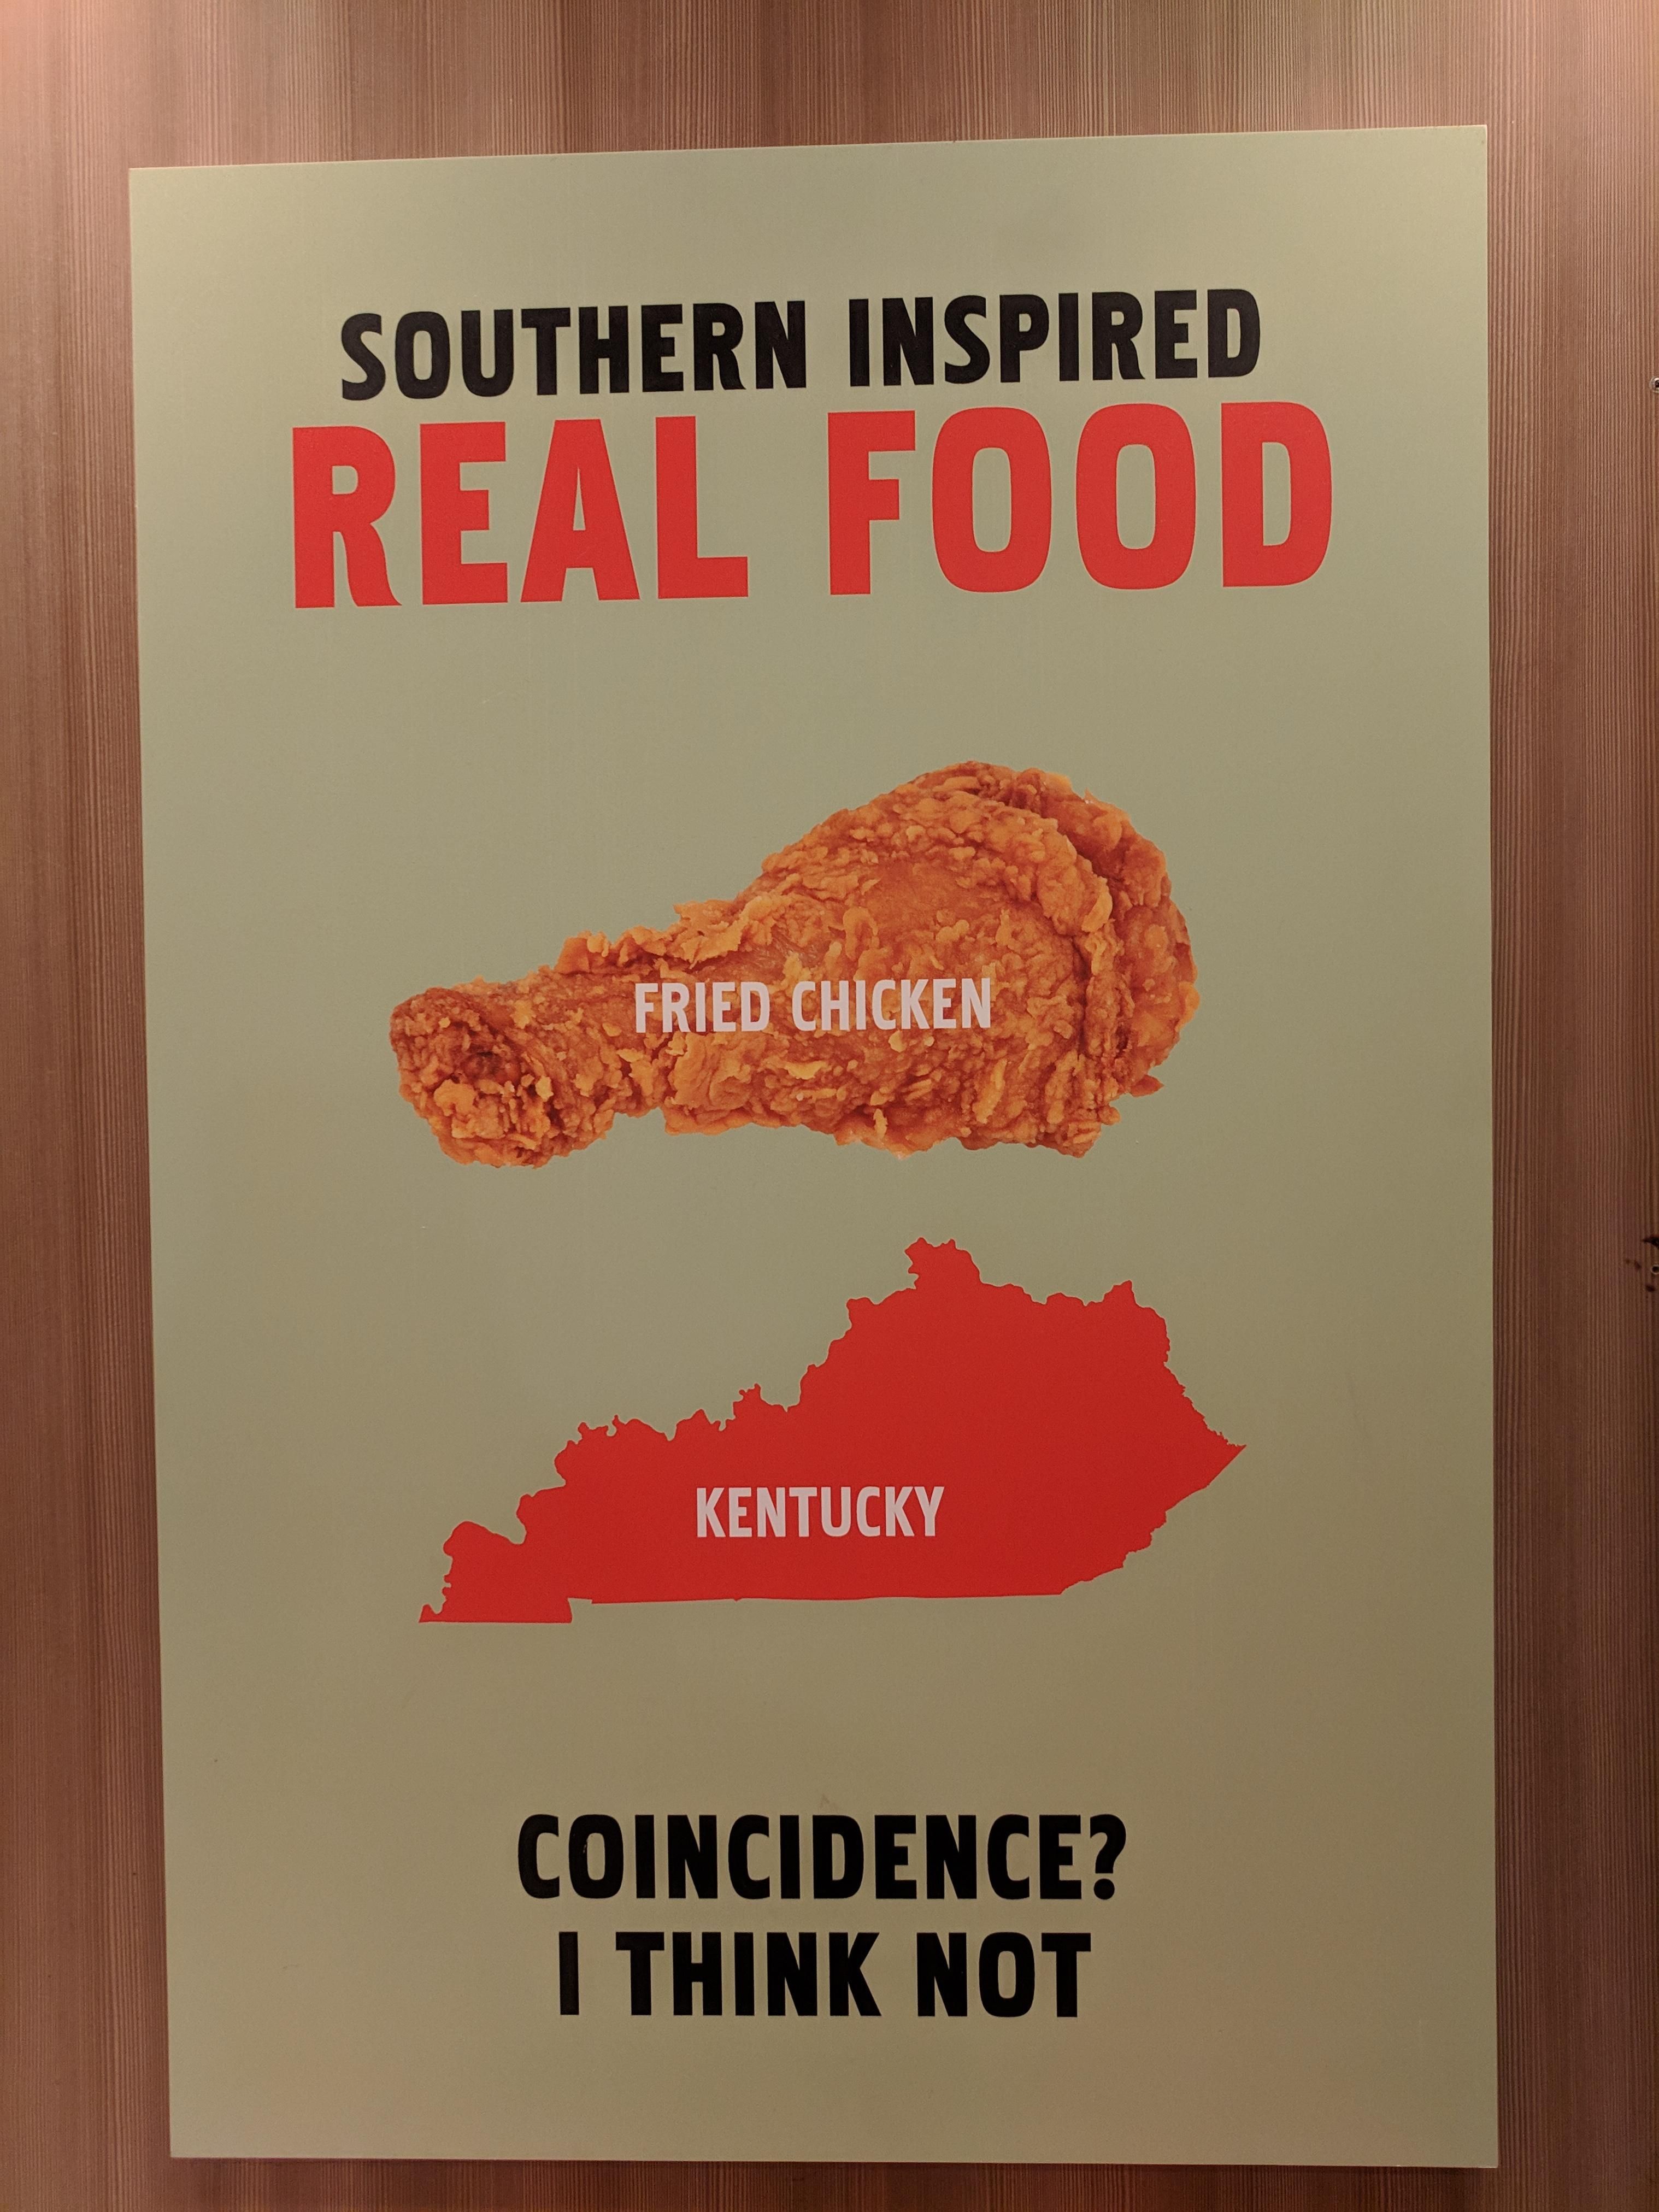 KFC gave me a chuckle this morning